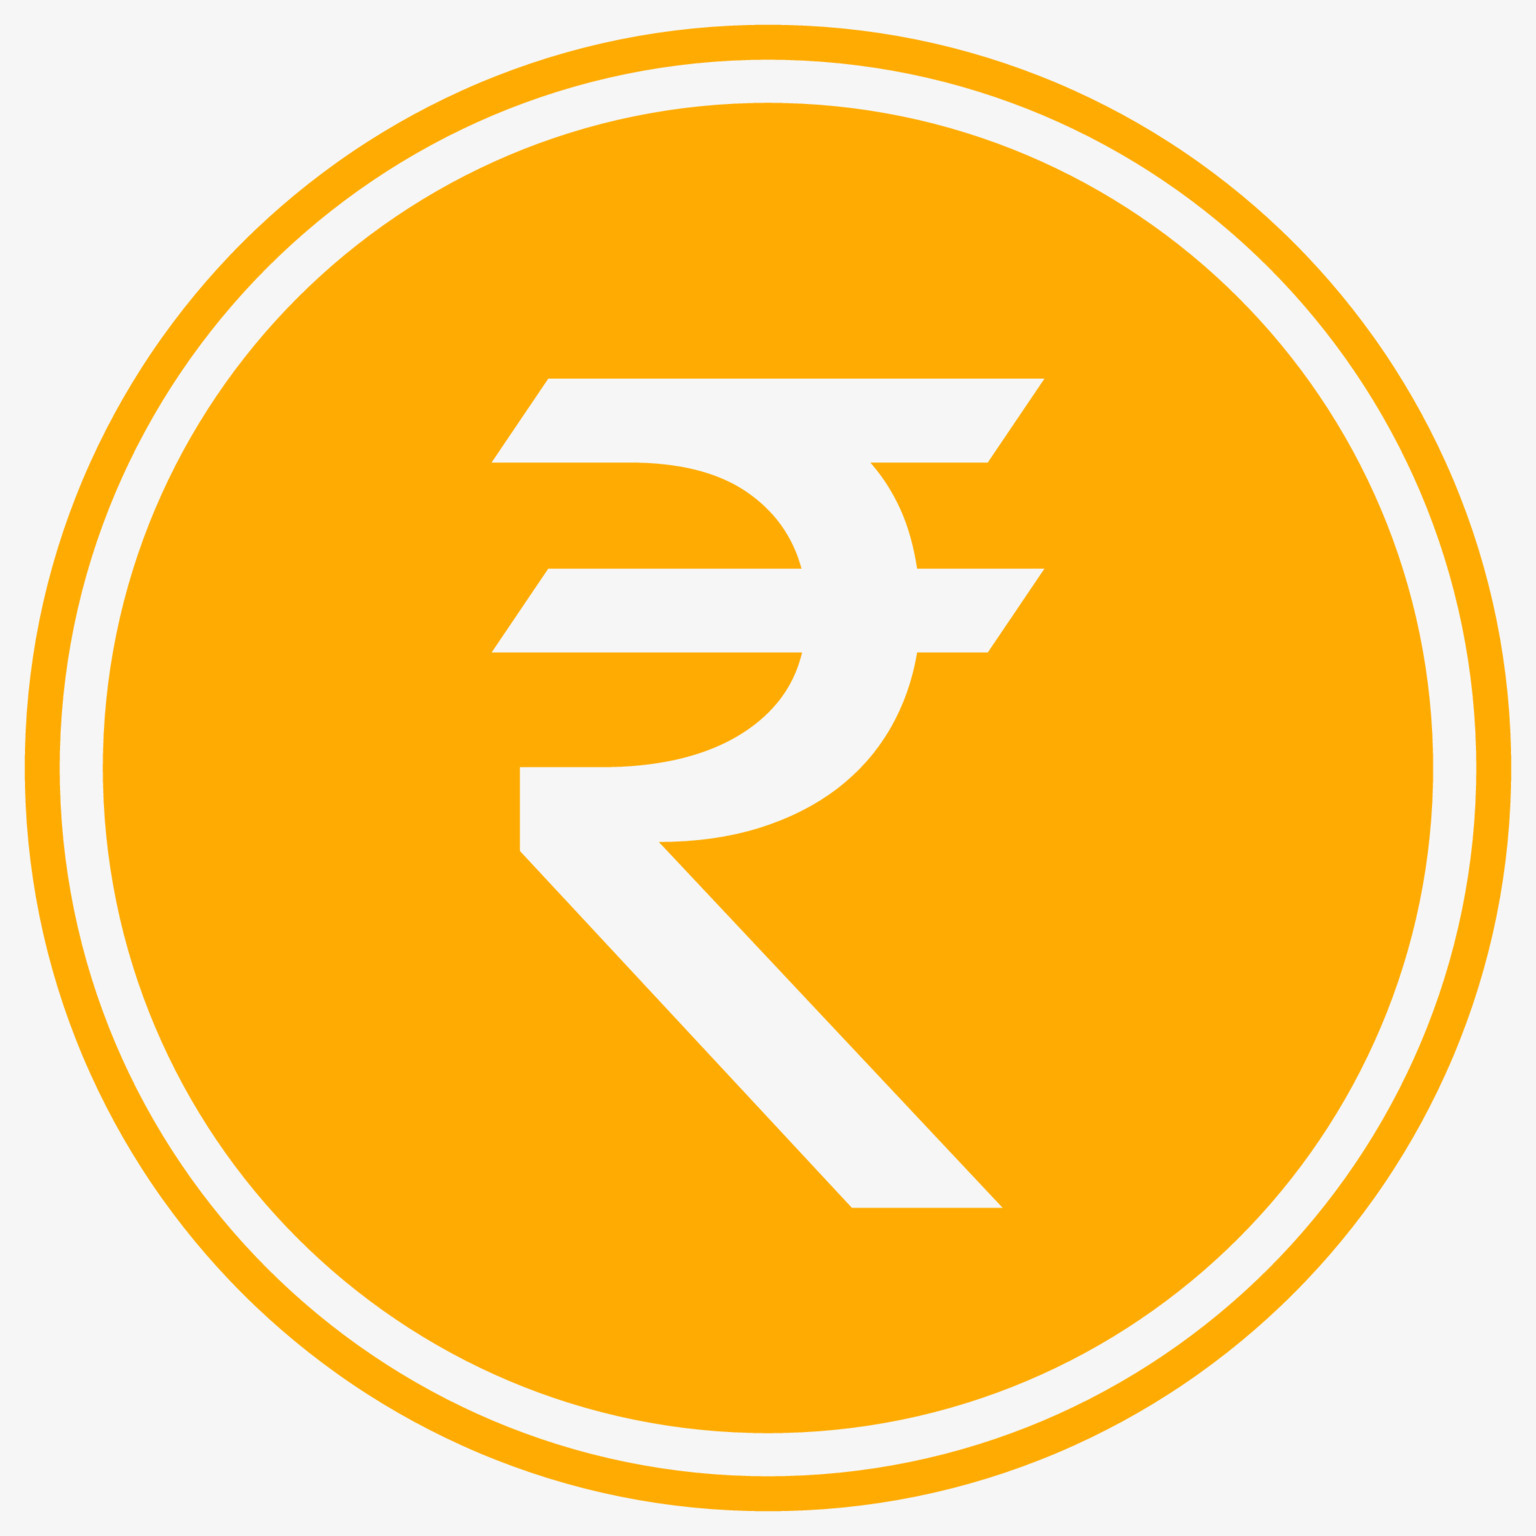 vecteezy_rupee-icon-indian-currency-symbol-vector-illustration_5567661.jpg